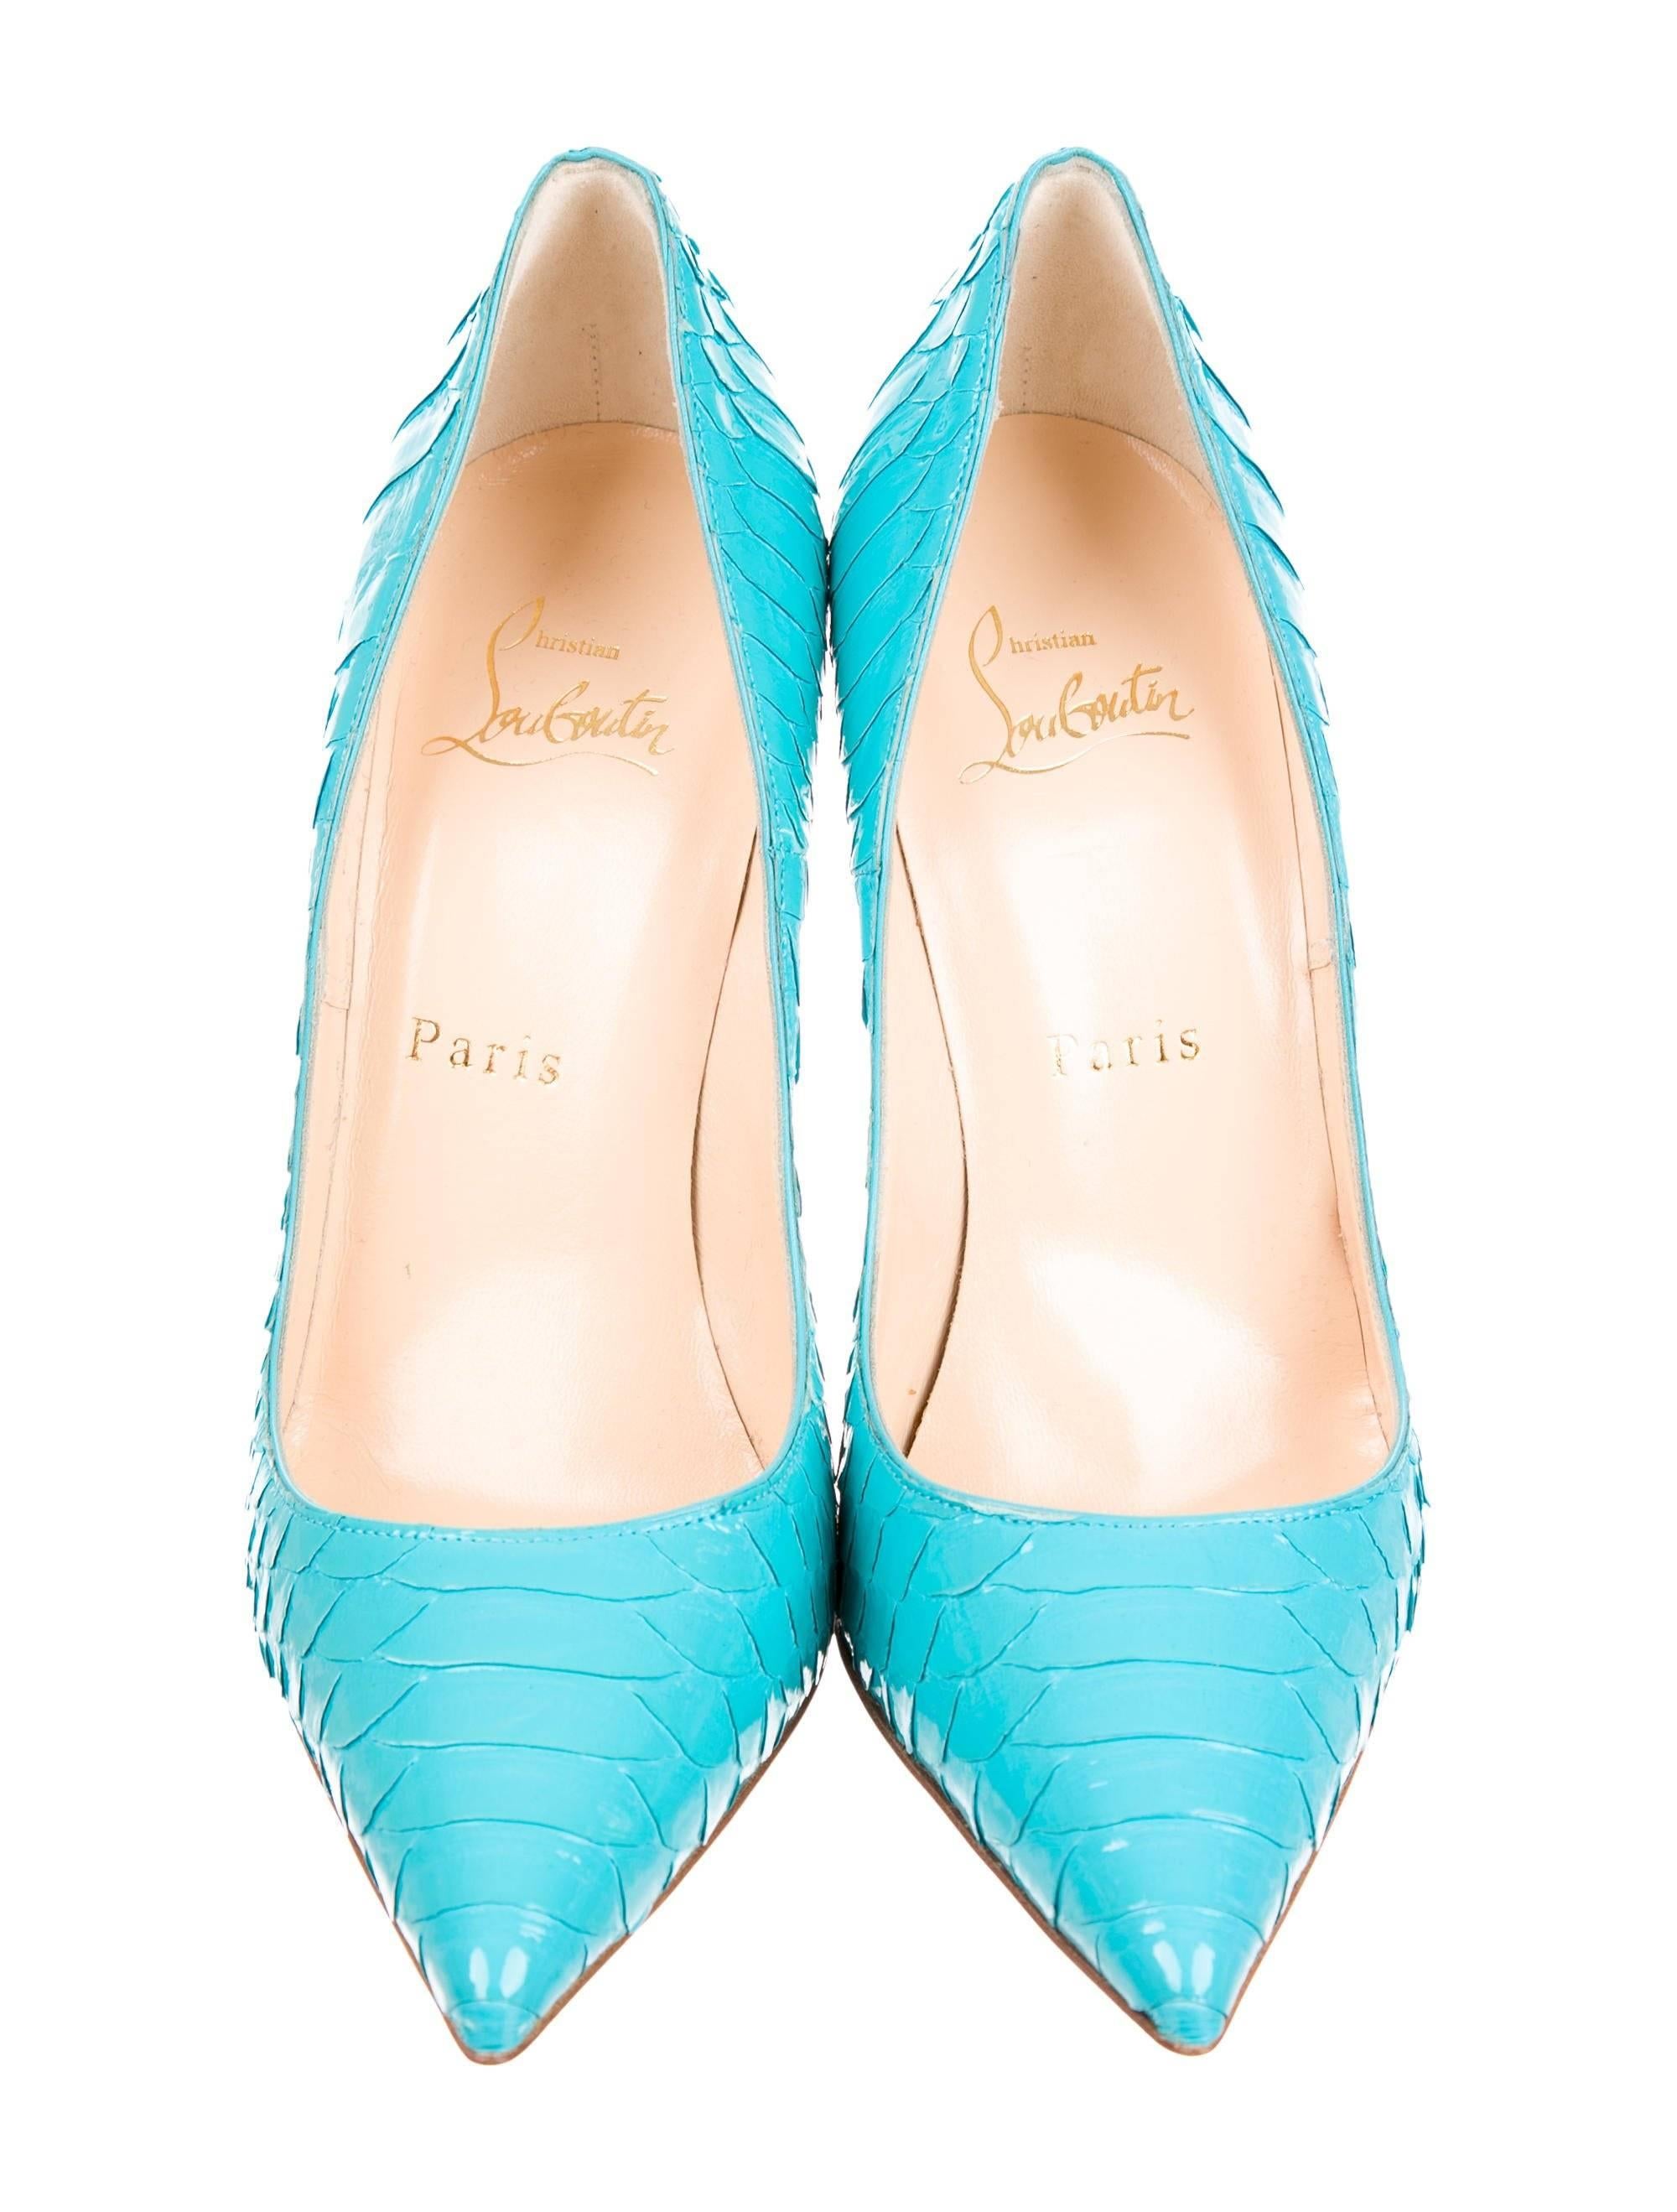 CURATOR'S NOTES

Christian Louboutin New Rare Tiffany Blue Snakeskin So Kate Heels Pumps in Box  

Size IT 36.5
Snakeskin (Python)
Slip on 
Made in Italy
Heel height 4.75"
Includes original Christian Louboutin dust bag and box